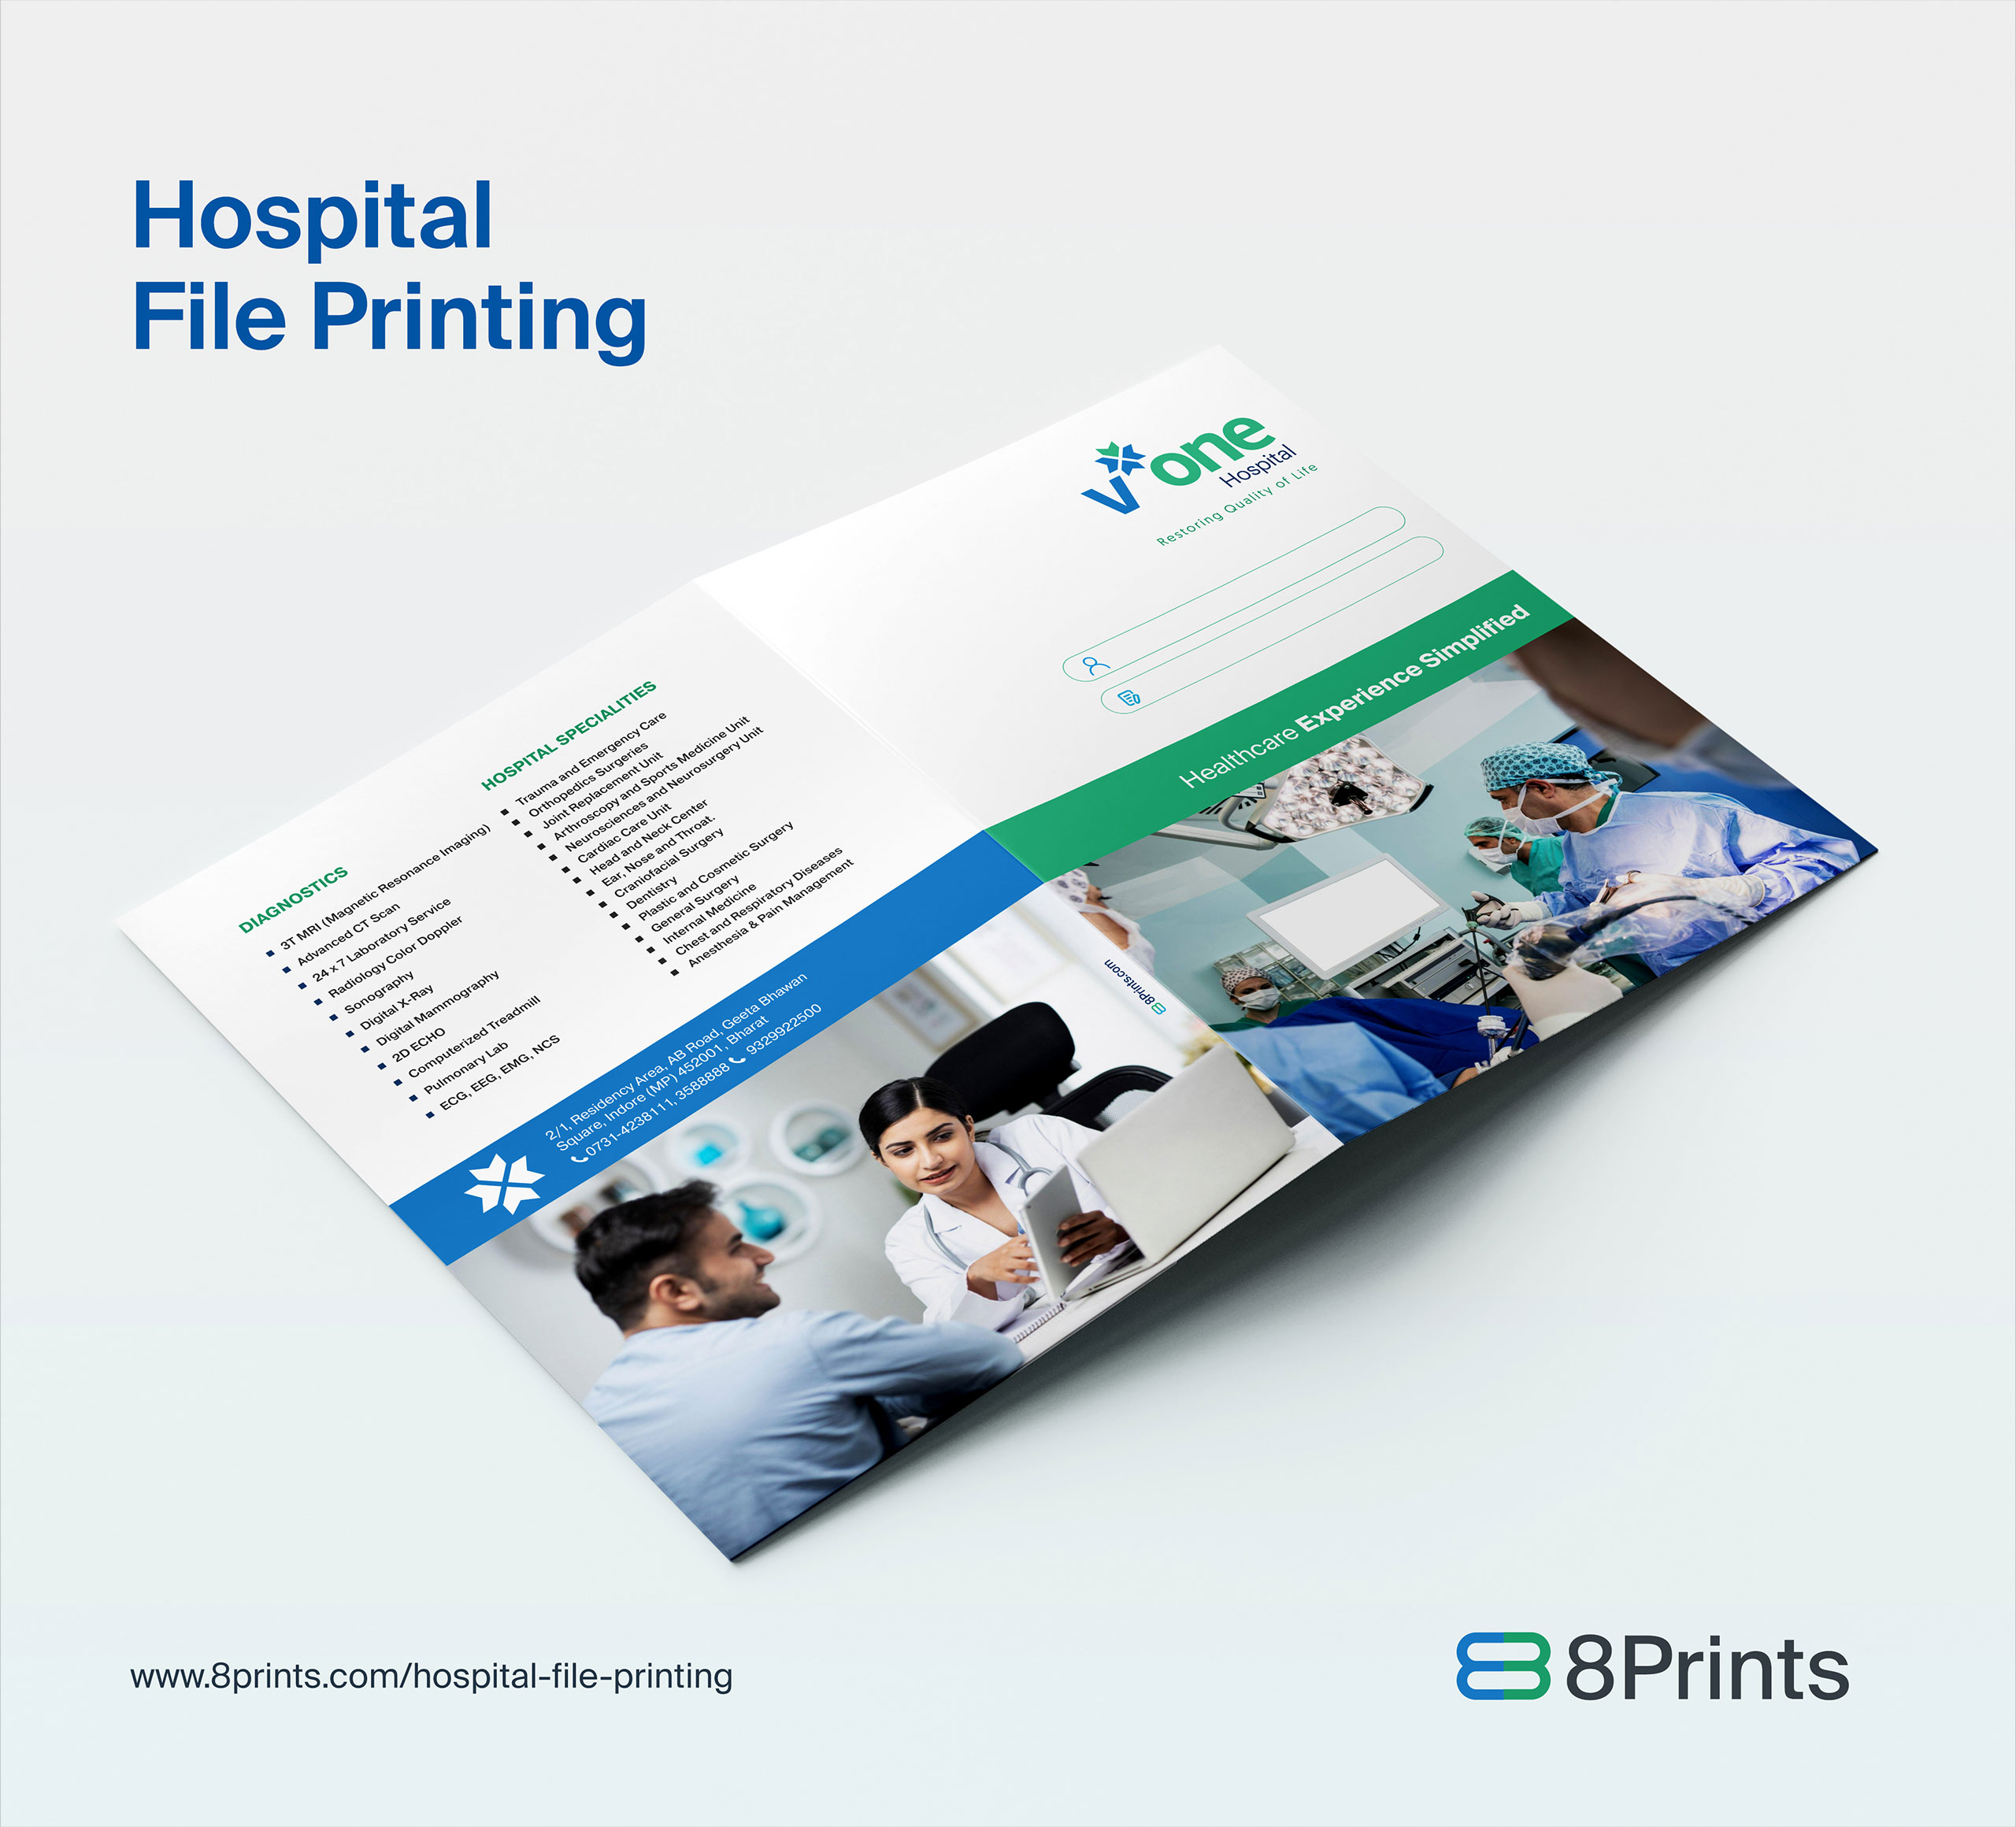 Hospital File Printing - PVC and Art Paper File Printing in India